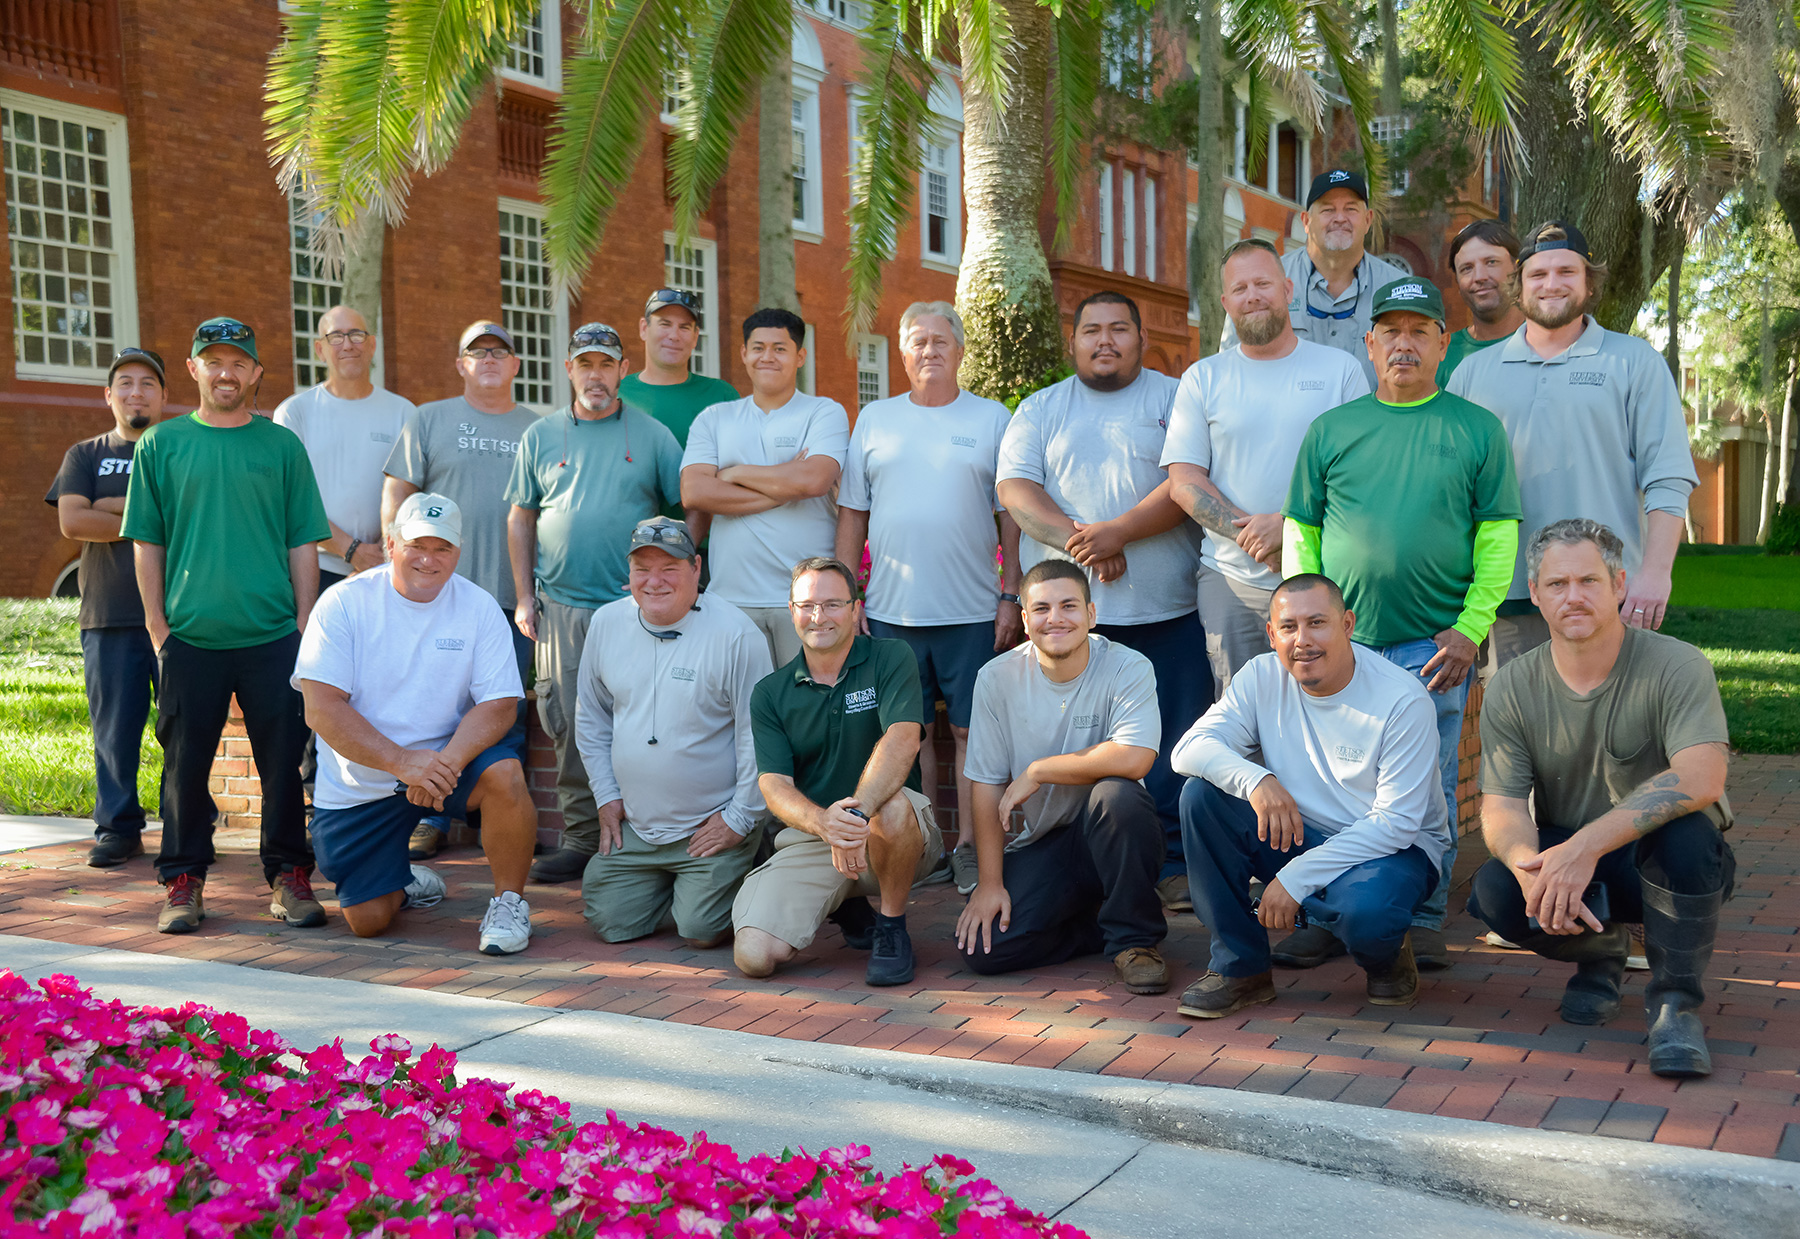 Group photo of Stetson's grounds crew